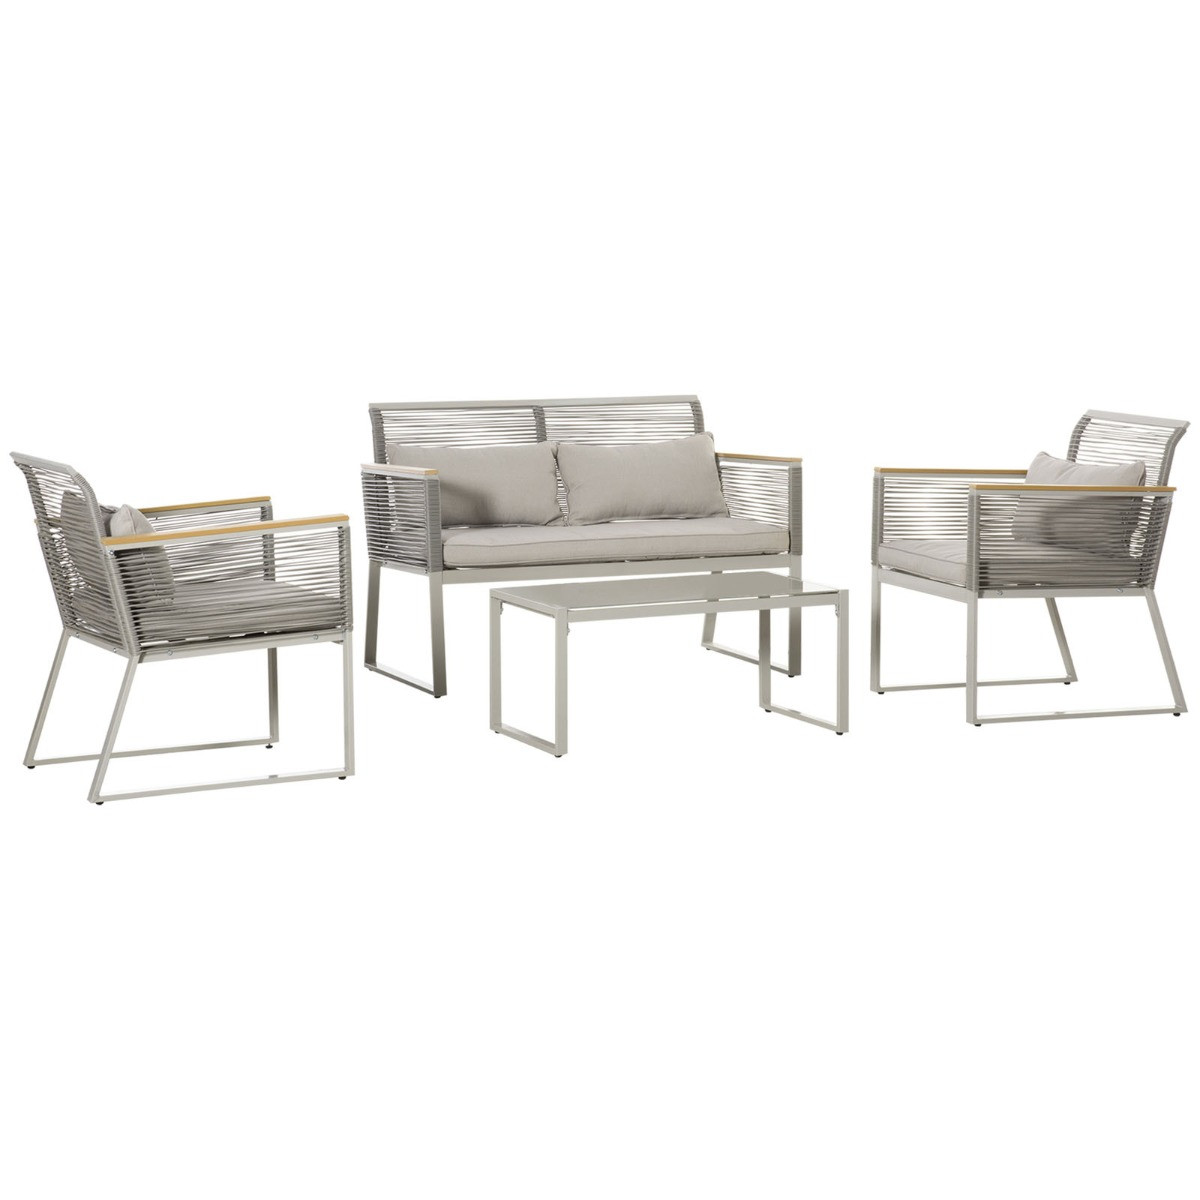 Outsunny Wicker Sofa Set With Tempered Glass Table, Grey - 4 Seater>